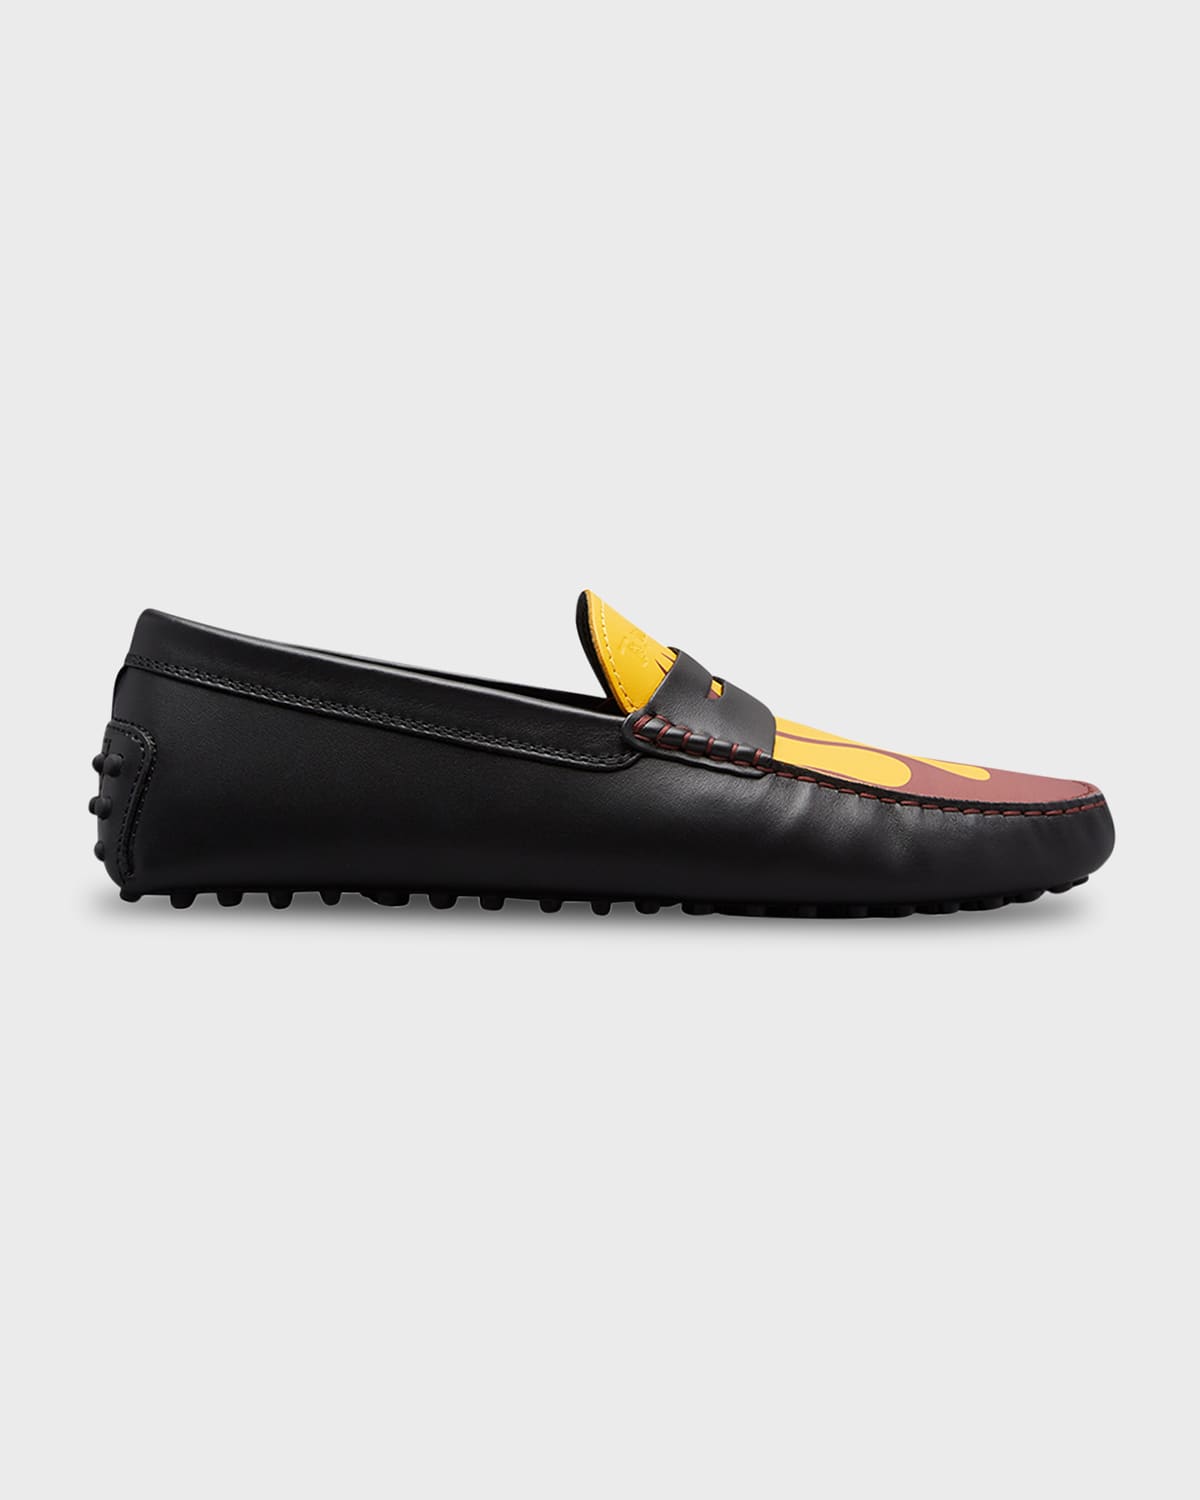 Moncler Genius Palm Angels Tod's Gommino Printed Leather Driving Shoes In Black